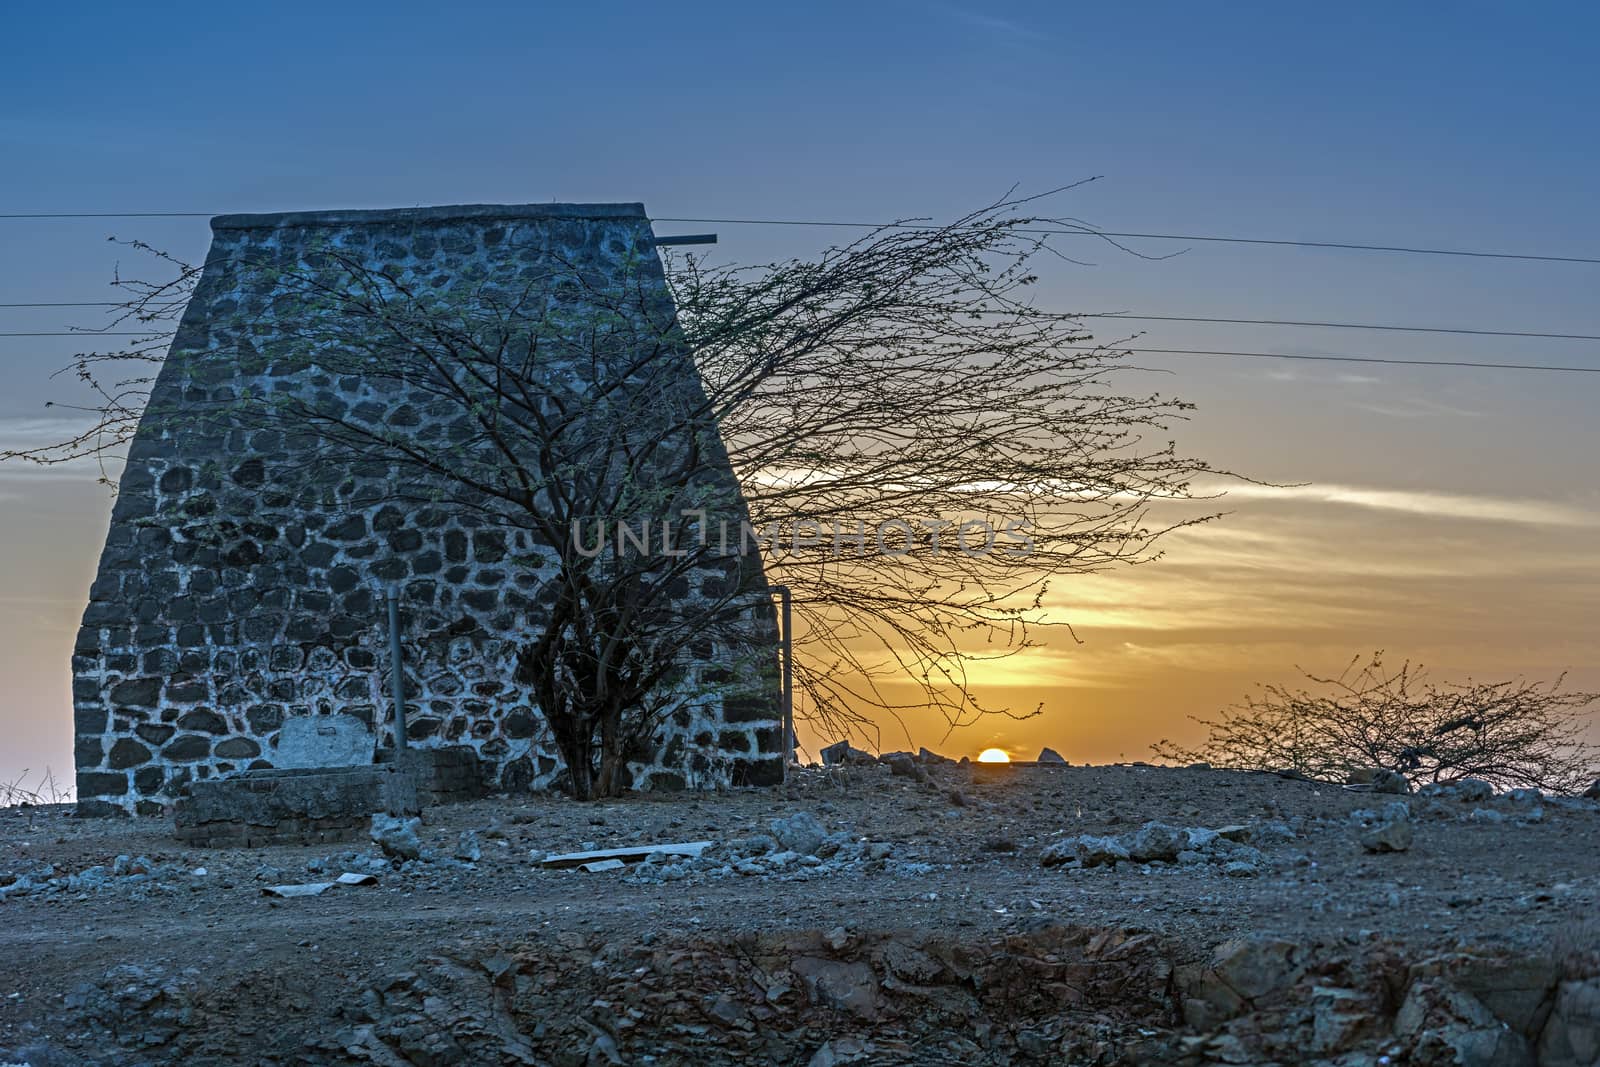 Sunrise behind an old stone structure in a small village in outskirts of city, Pune, India. by lalam